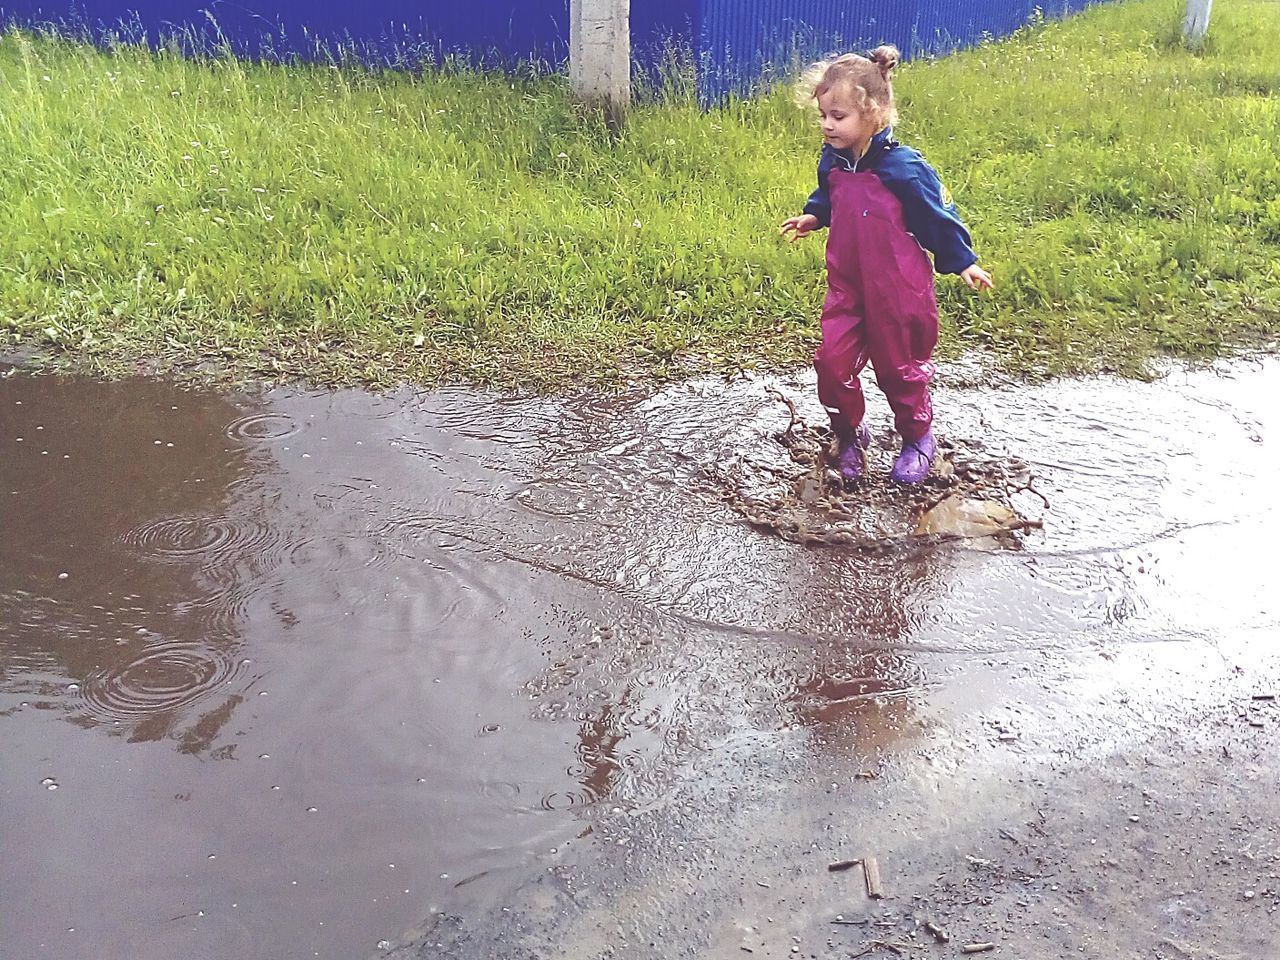 child, childhood, full length, one person, water, females, girls, real people, standing, women, day, land, lifestyles, nature, leisure activity, casual clothing, innocence, rainy season, rain, outdoors